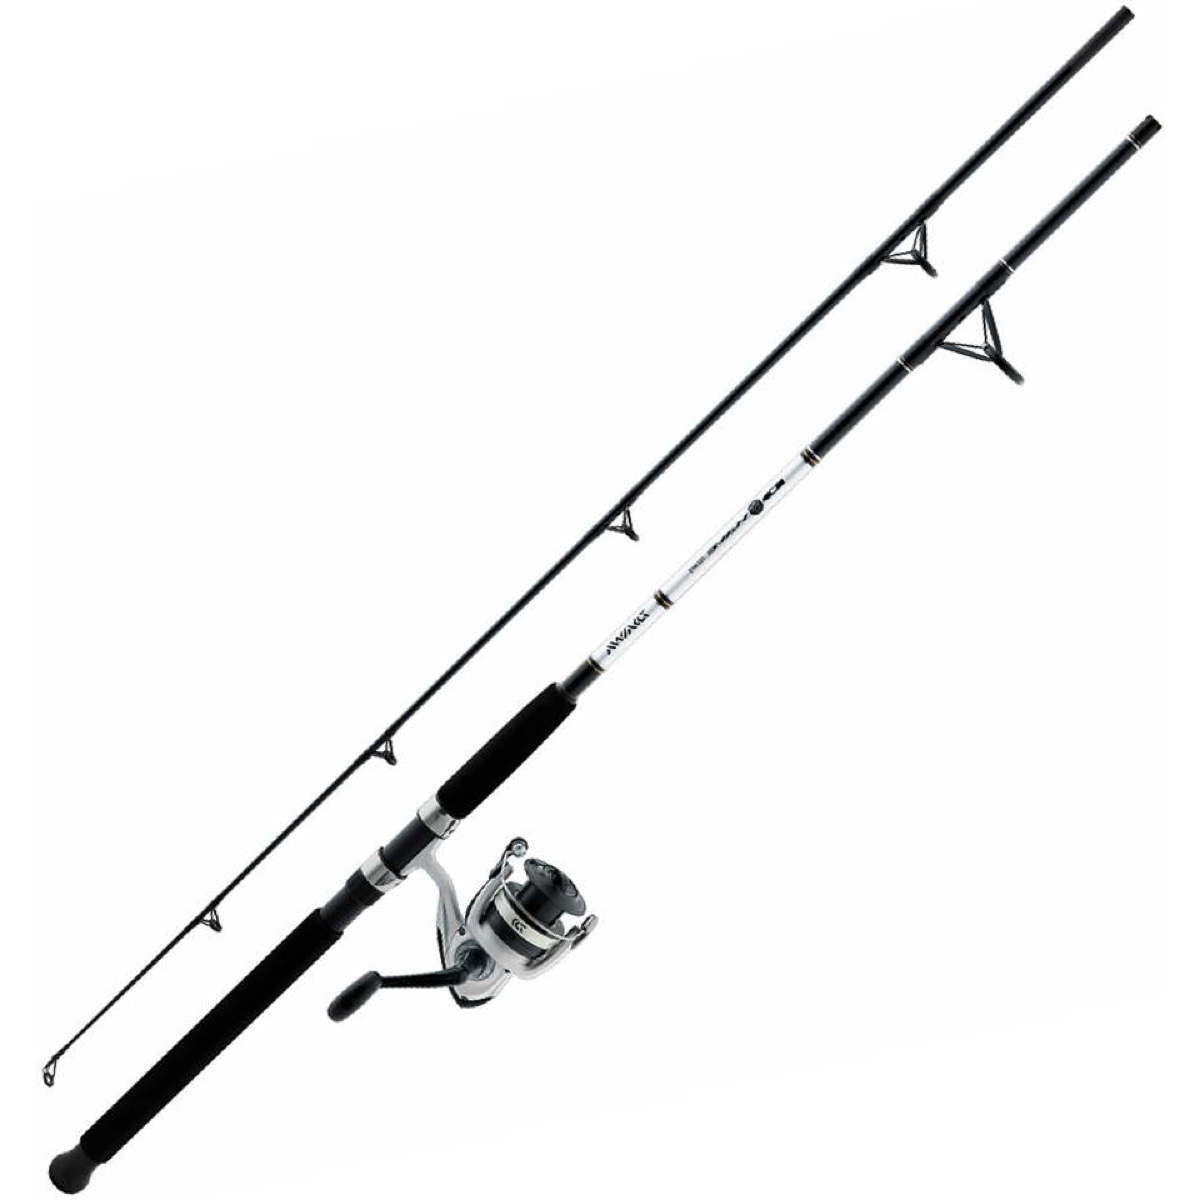 Photo of Daiwa D-Wave Saltwater Spinning Reel & Fiberglass Rod Combo for sale at United Tackle Shops.